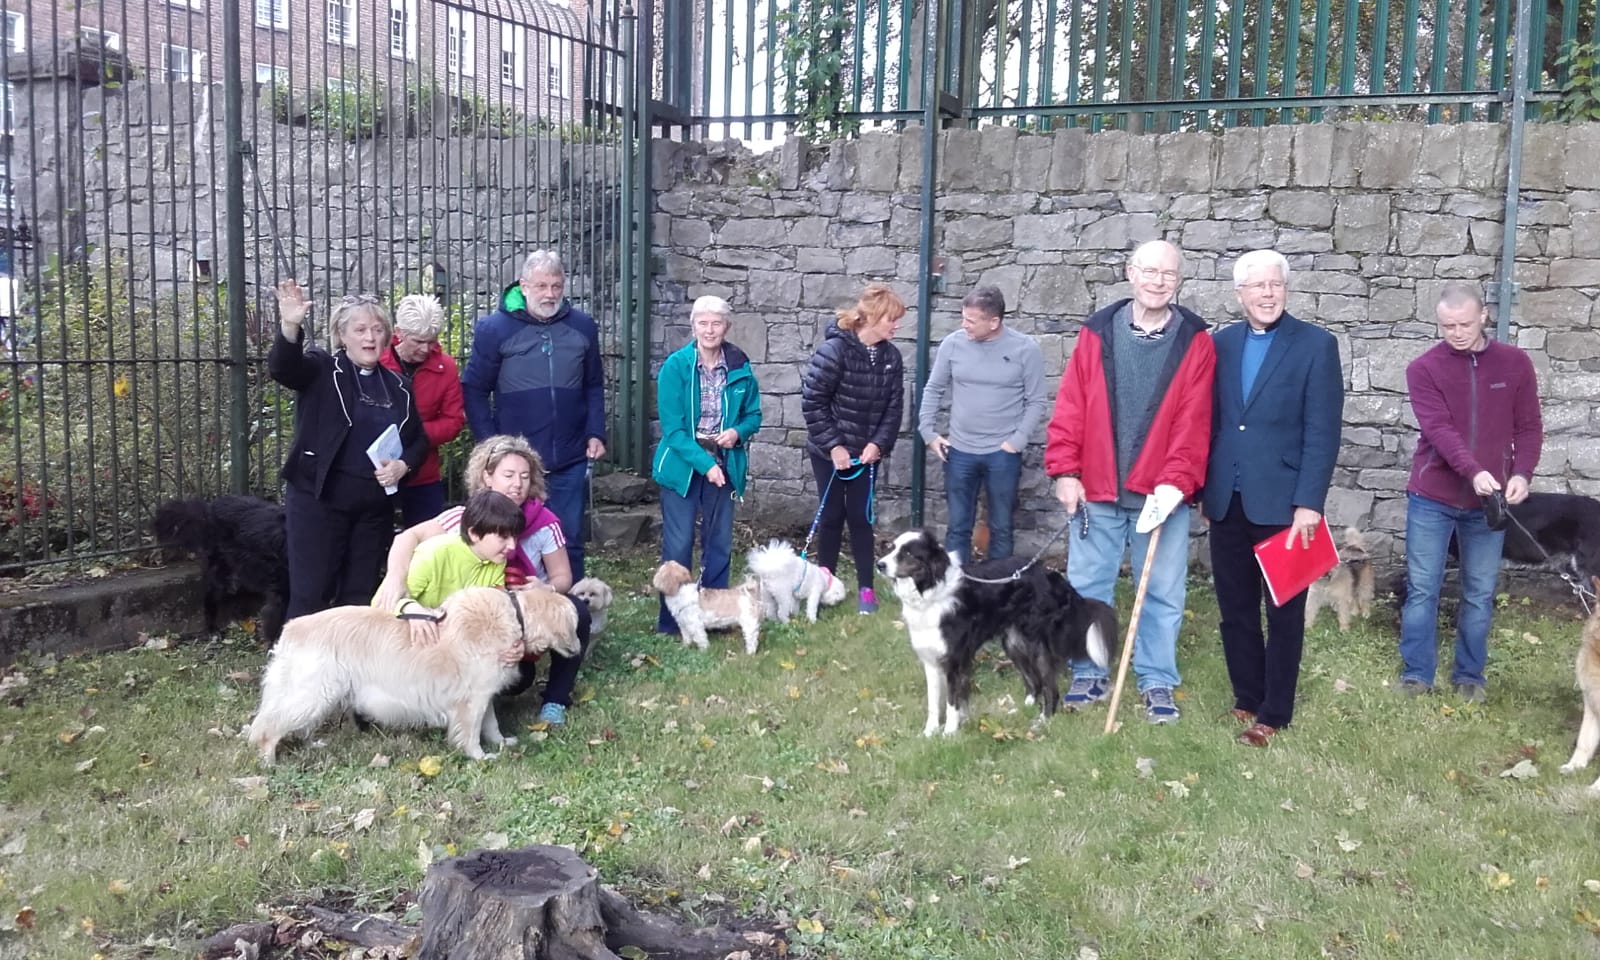 Limerick Animal Welfare host a Blessing of Animals ceremony